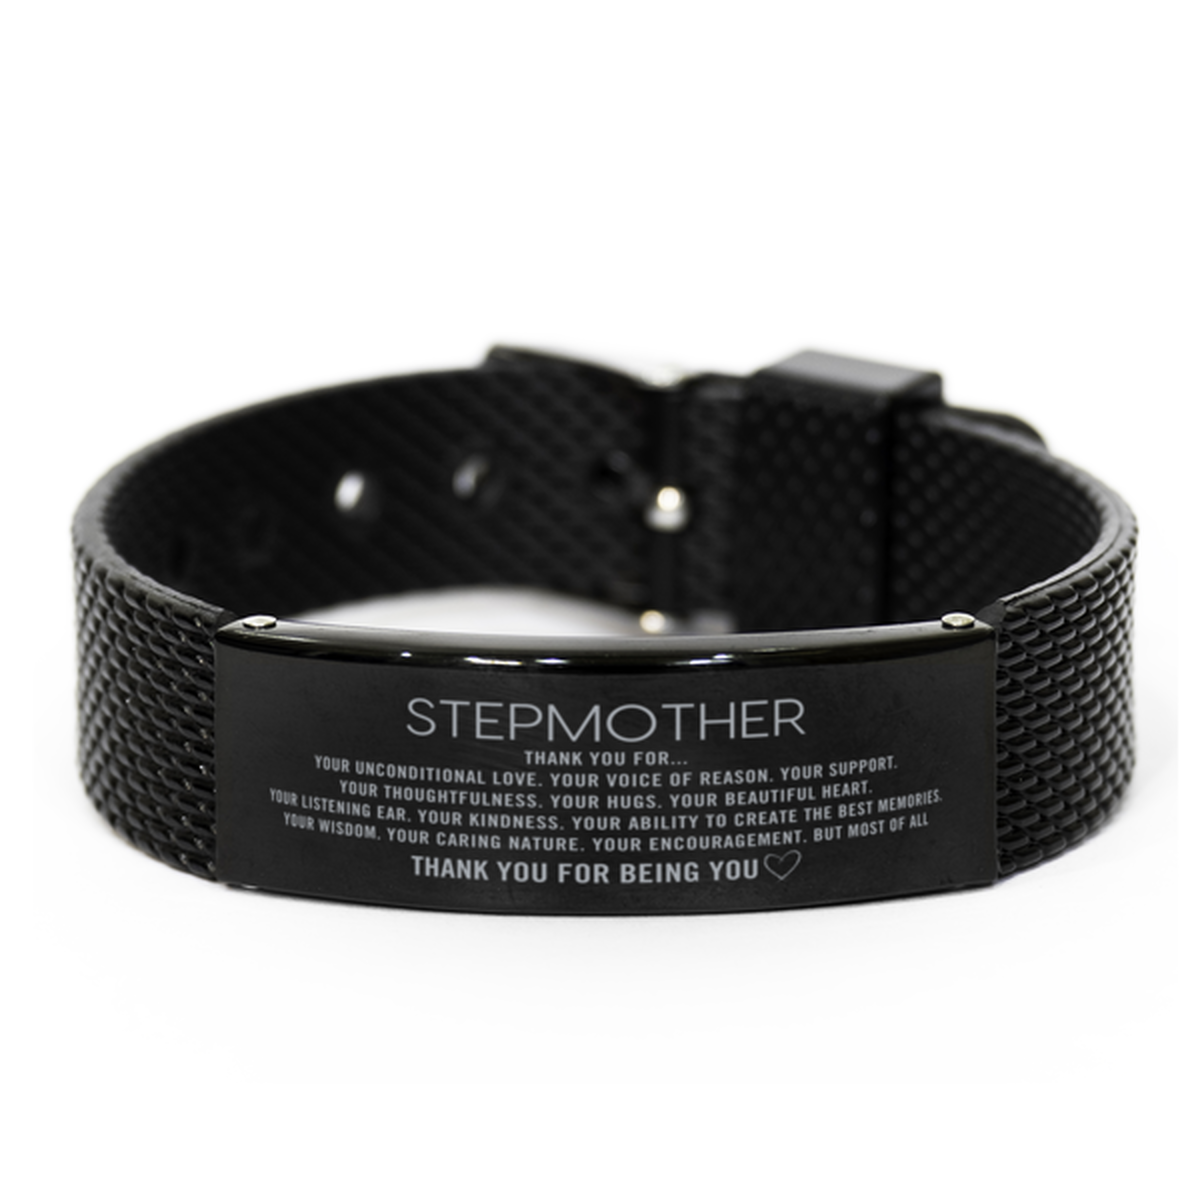 Stepmother Black Shark Mesh Bracelet Custom, Engraved Gifts For Stepmother Christmas Graduation Birthday Gifts for Men Women Stepmother Thank you for Your unconditional love